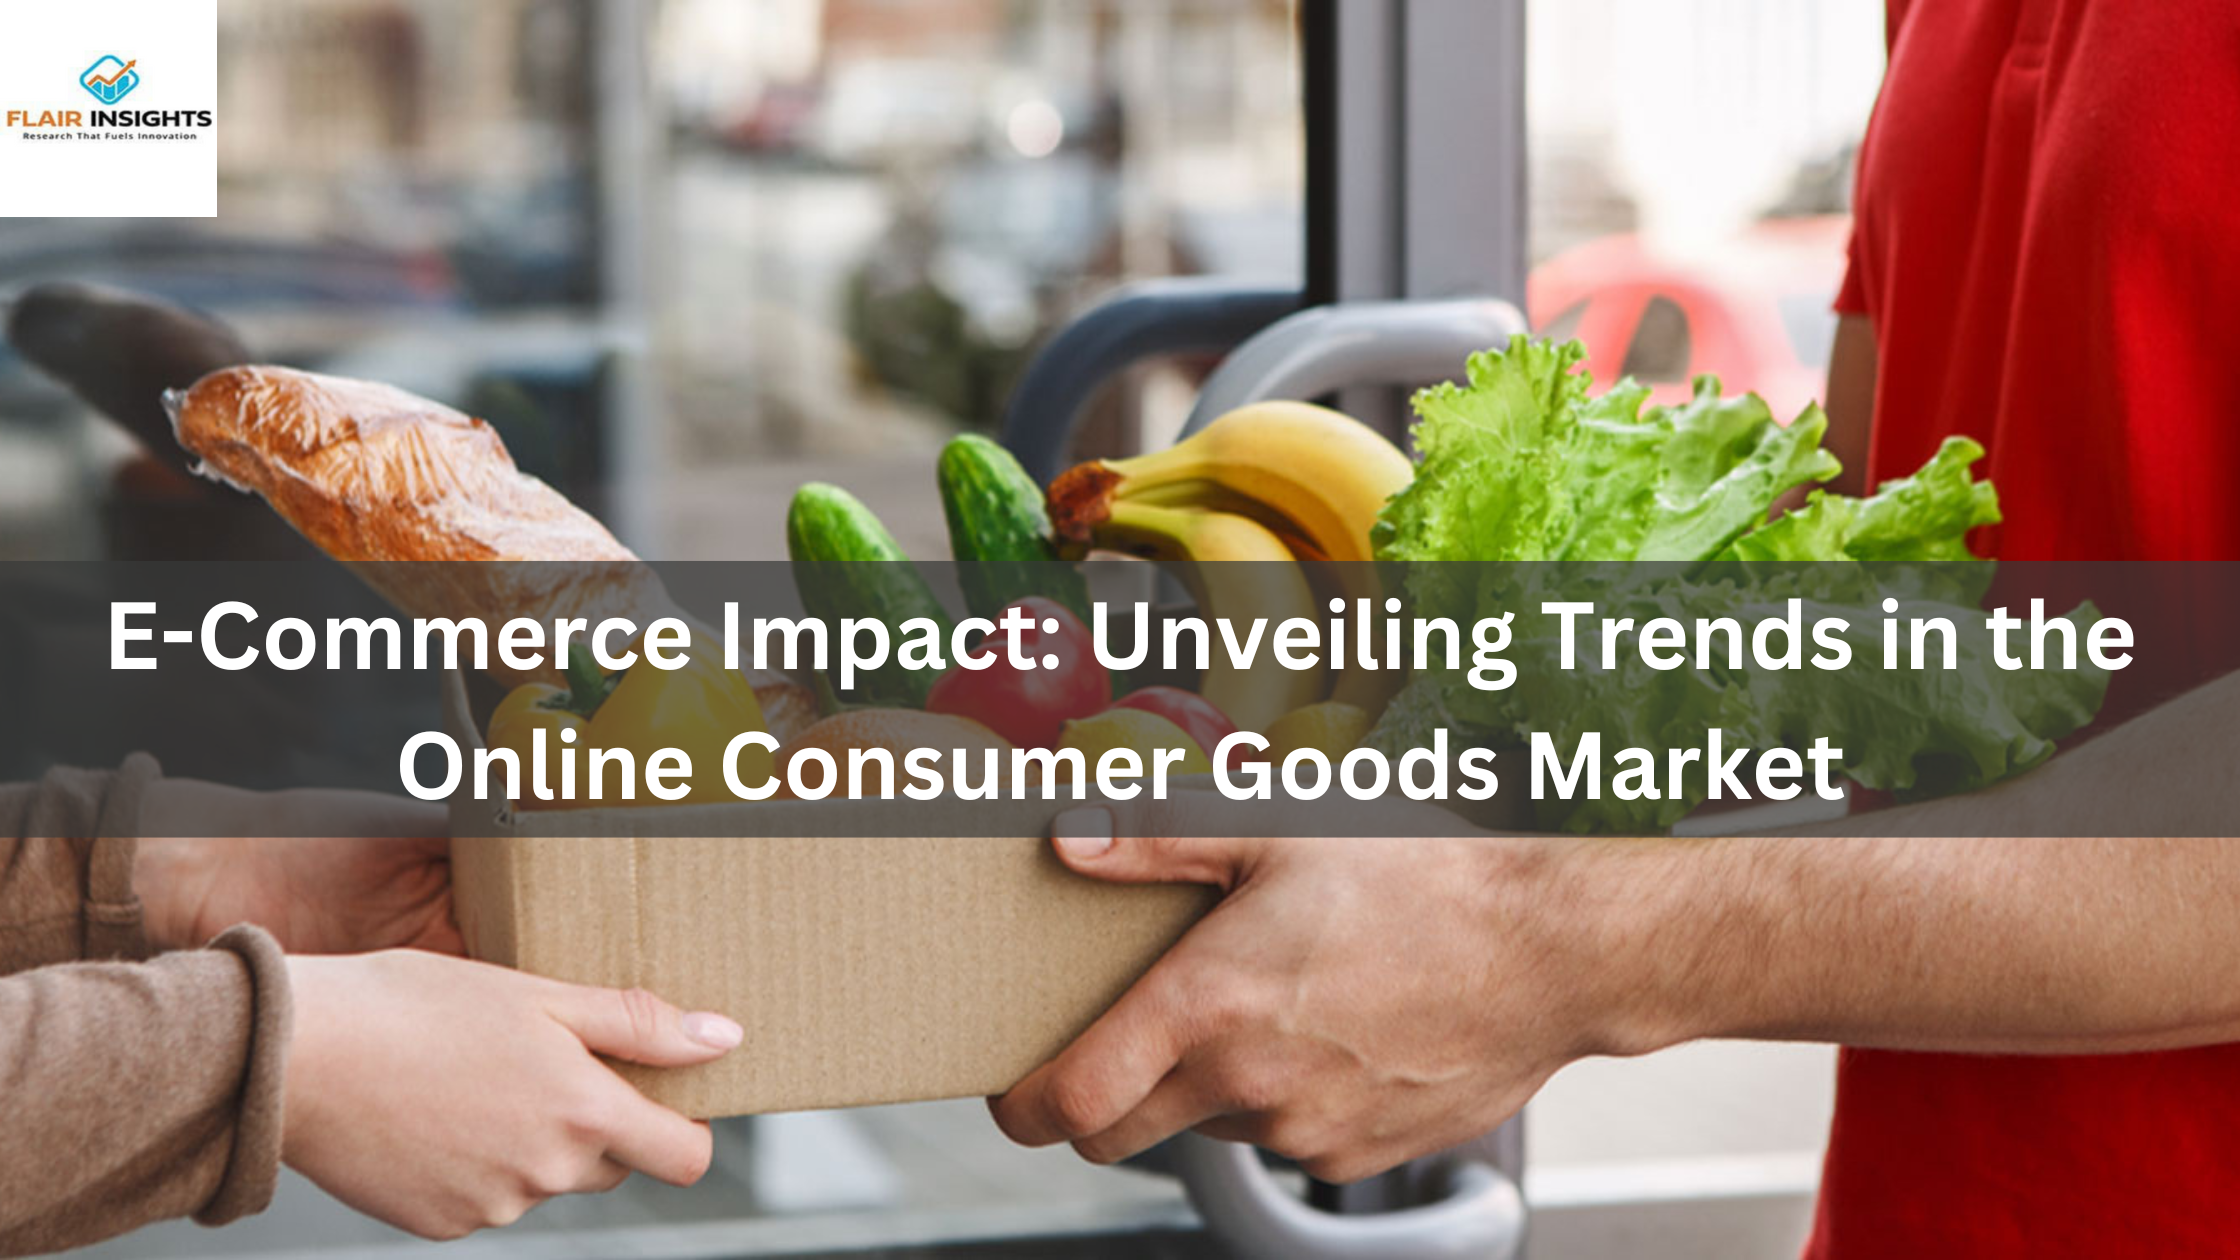 E-Commerce Impact: Unveiling Trends in the Online Consumer Goods Market